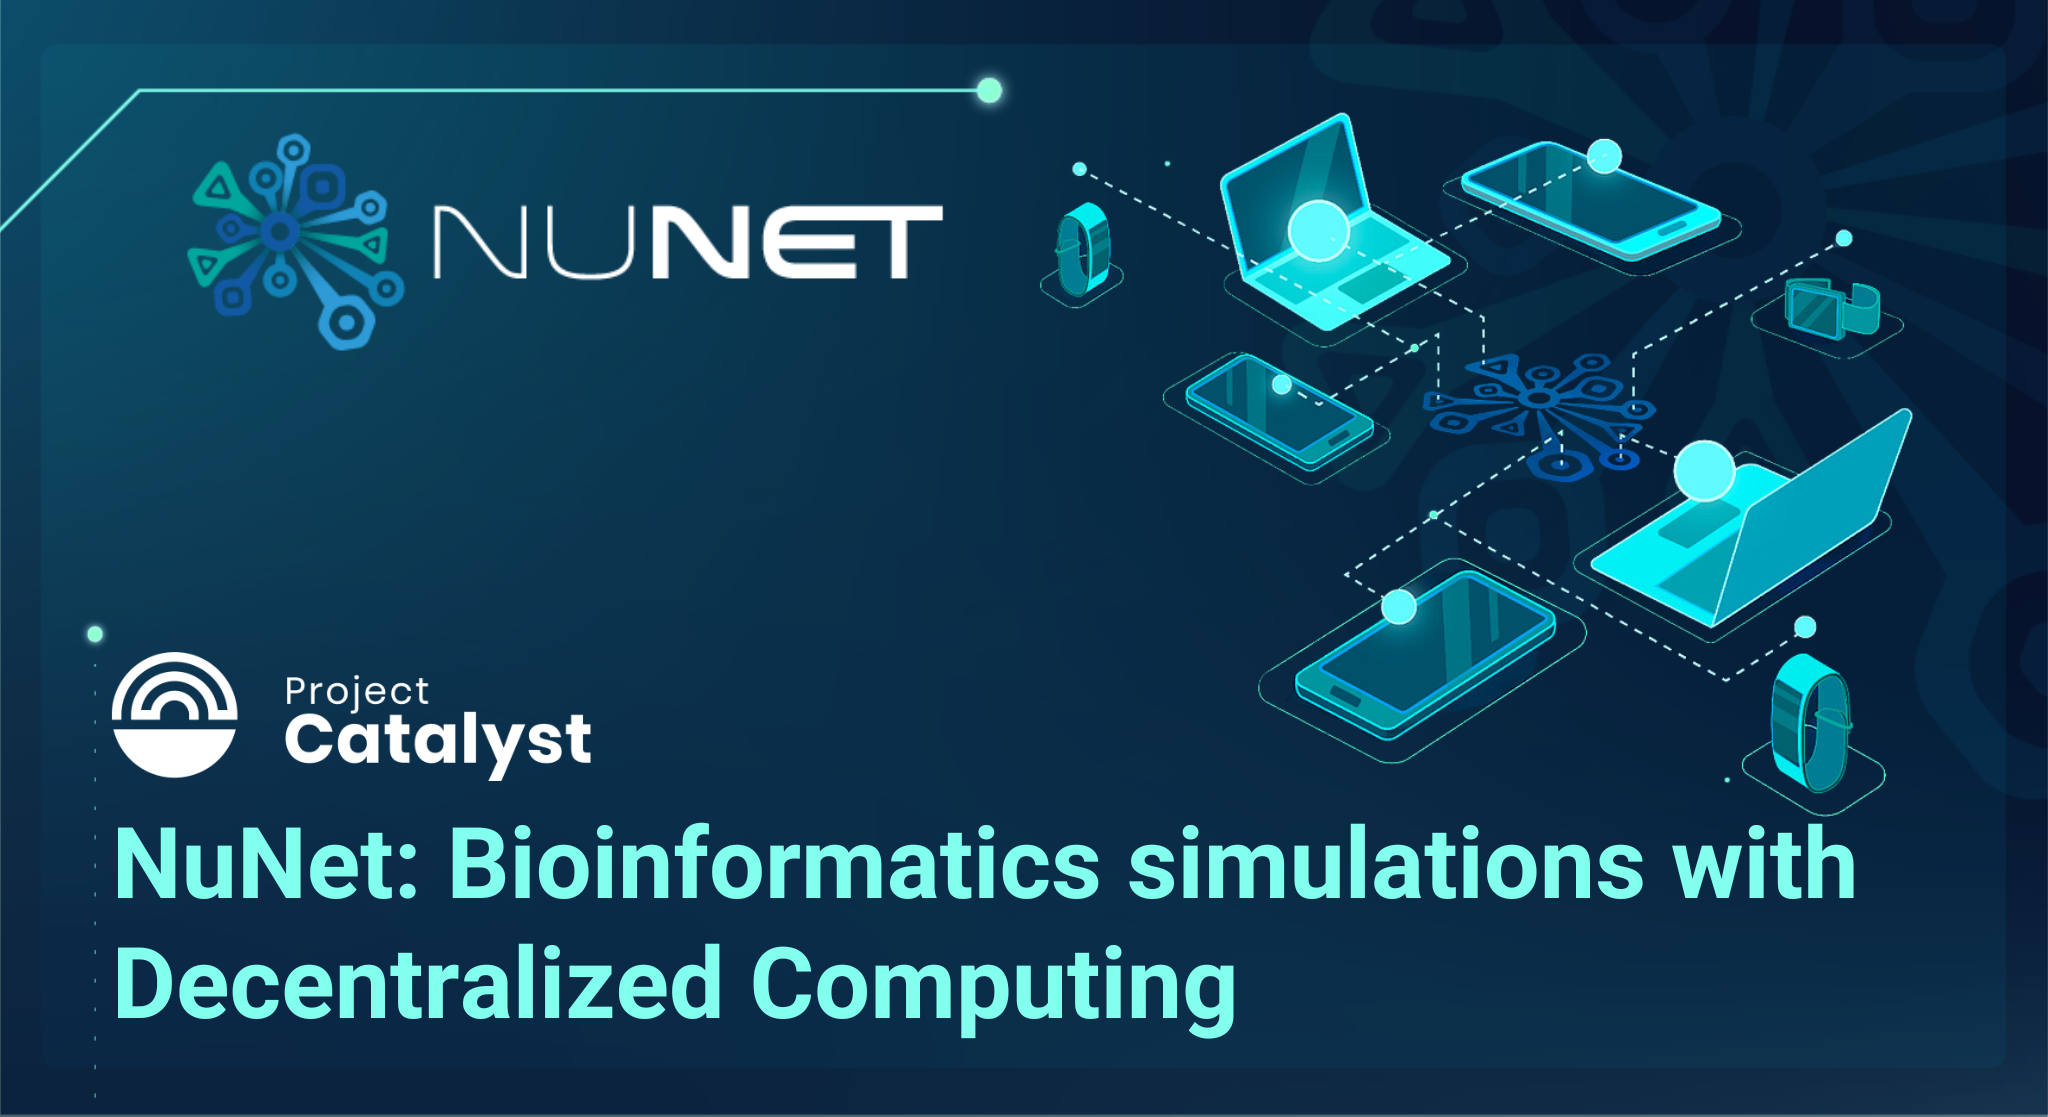 NuNet_-Bioinformatics-simulations-with-Decentralized-Computing-BLOG-d31bcd.png